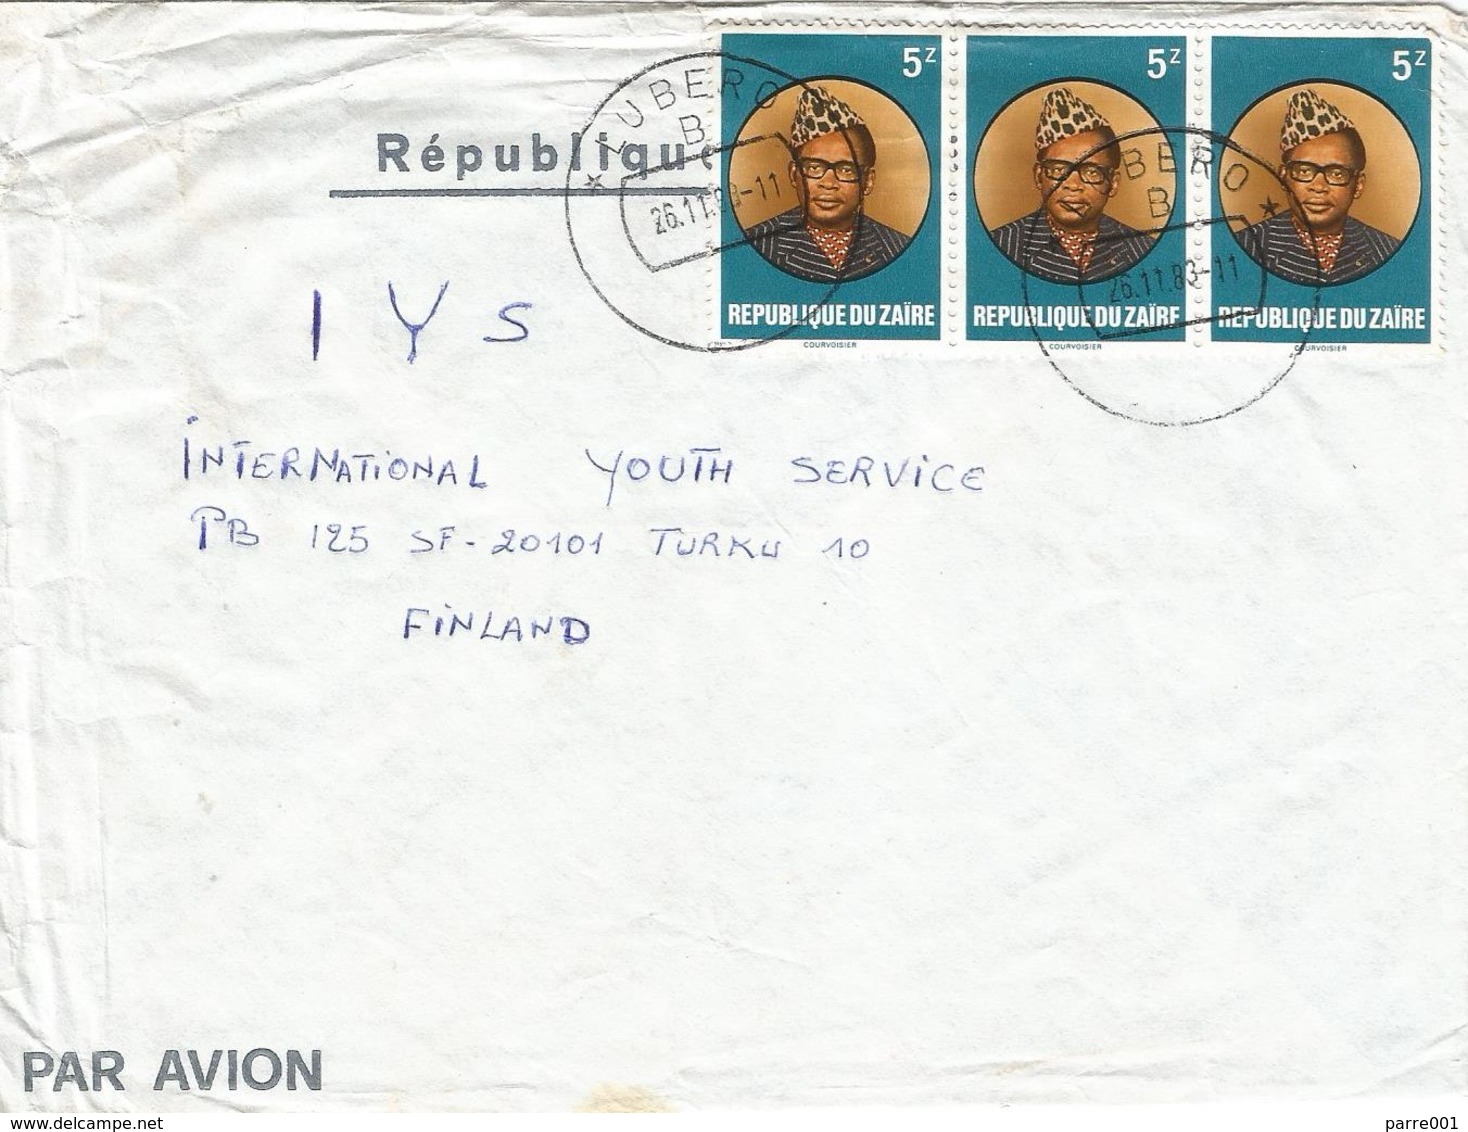 Zaire DRC Congo 1983 Lubero Code Letter B President Mobutu Cover - Used Stamps